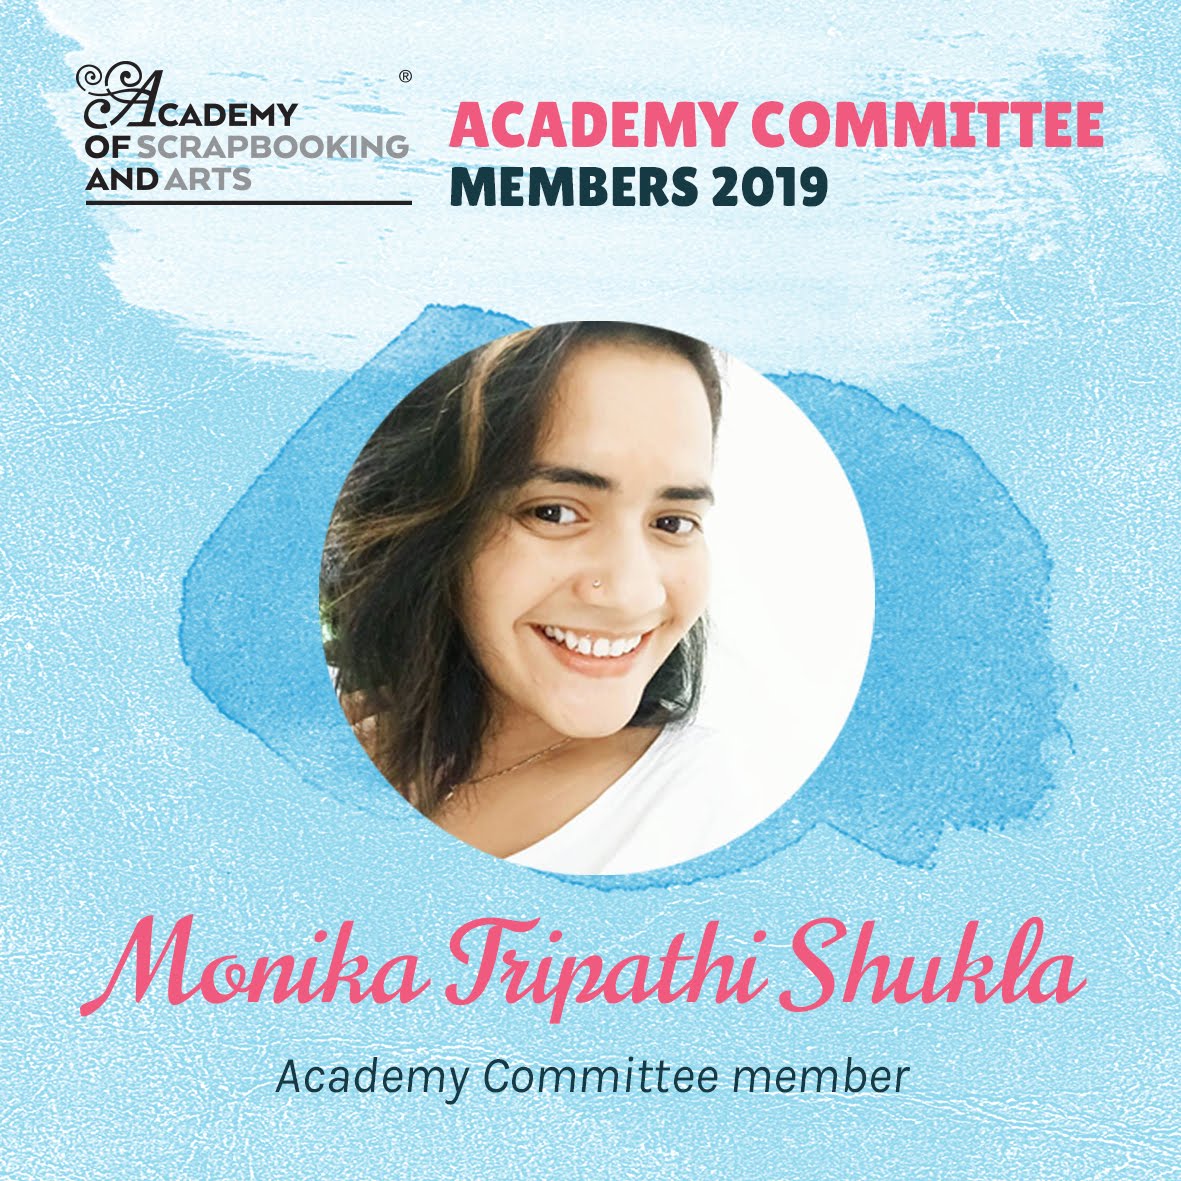 Committee Member for Academy of Scrapbooking and Arts